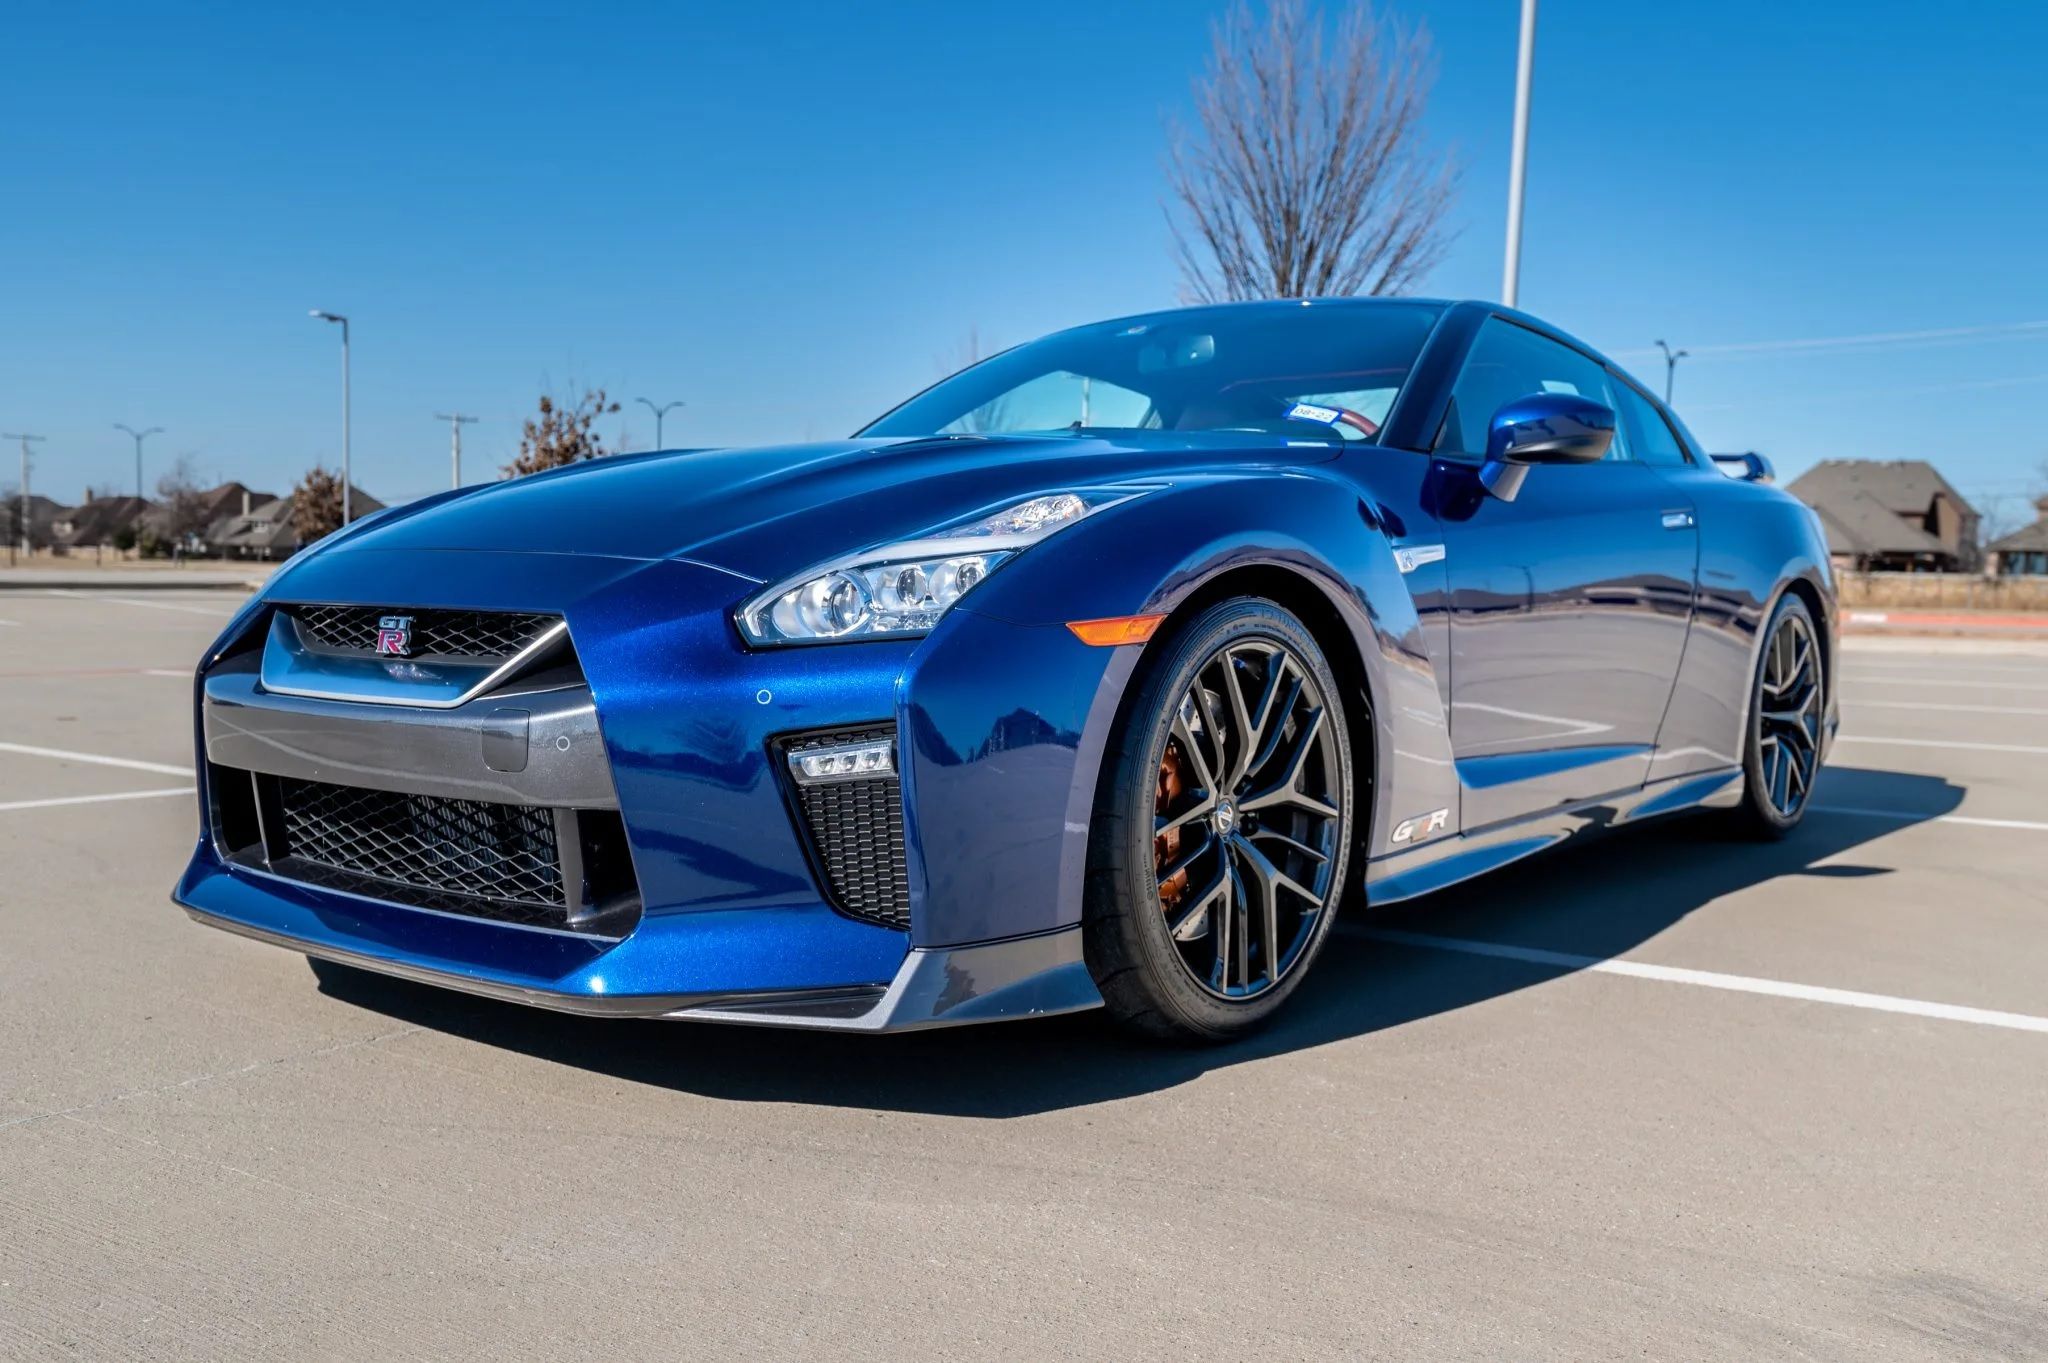 Nissan Skyline GT-R Problems: 8 Common Issues